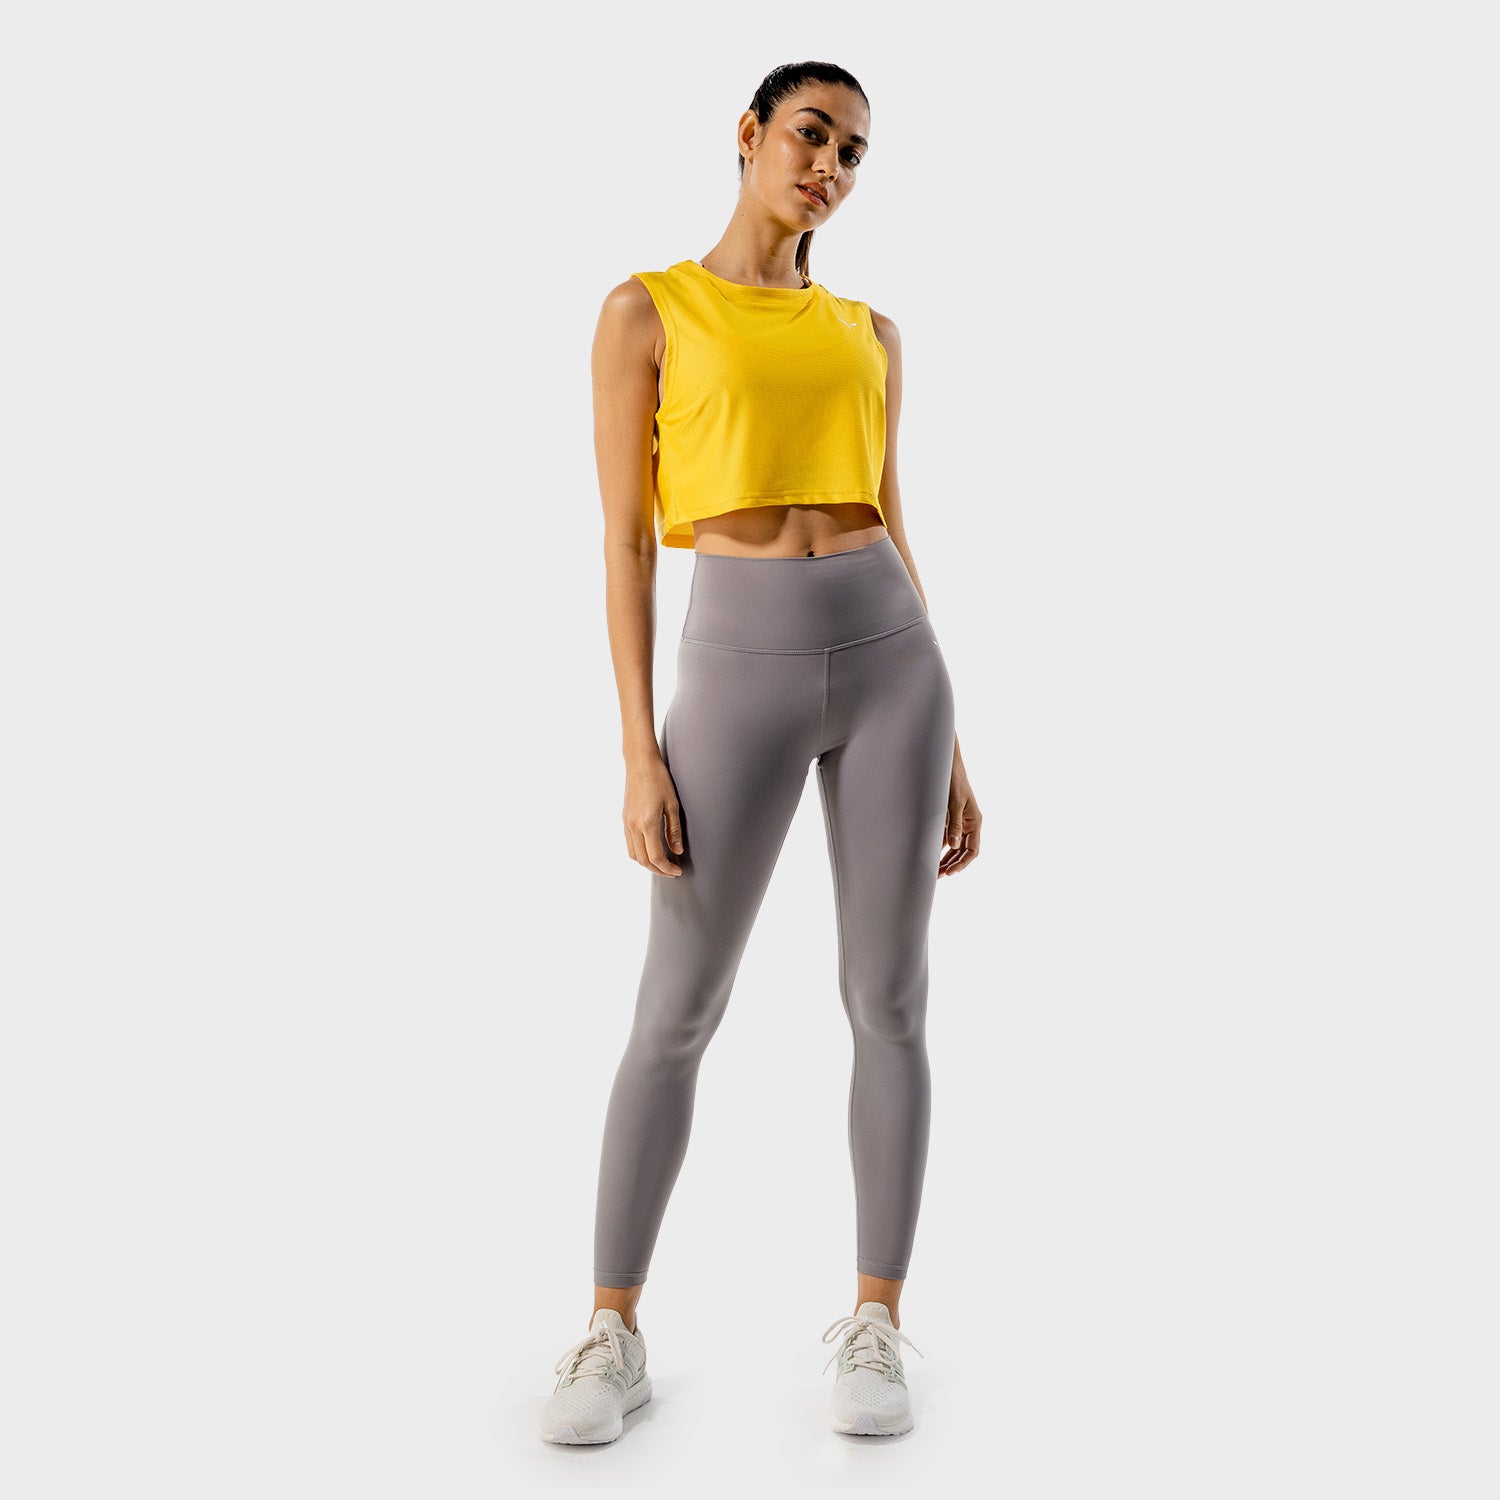 squatwolf-gym-t-shirts-for-women-limitless-crop-top-yellow-workout-clothes